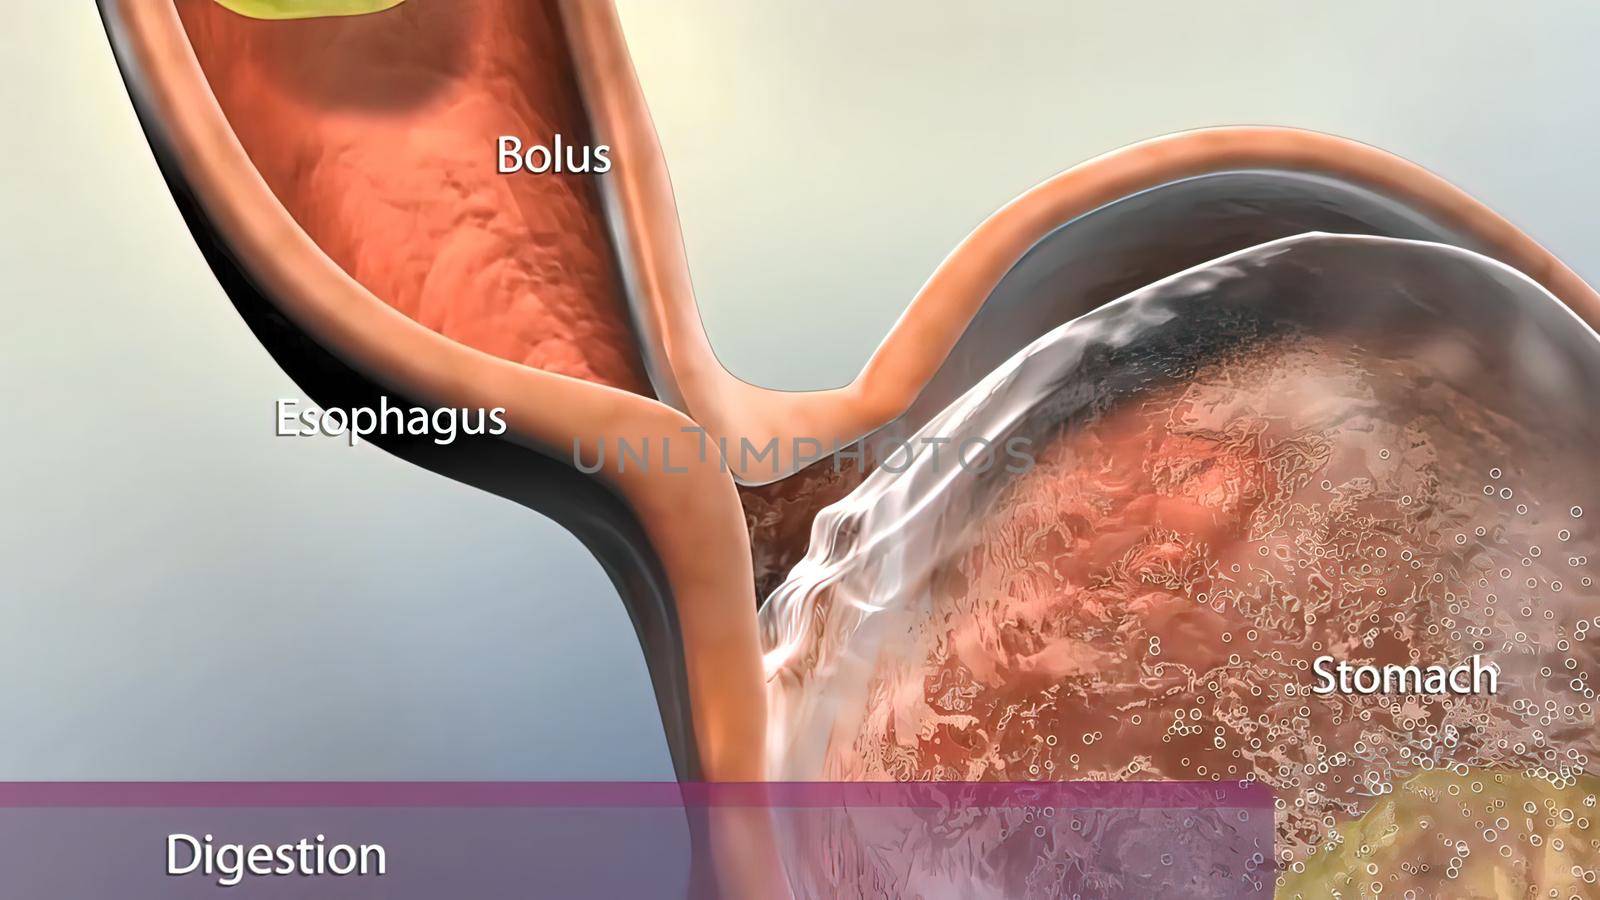 After food enters your stomach, the stomach muscles mix the food and liquid with digestive juices. The stomach slowly empties its contents, called chyme, into your small intestine. 3d illustration